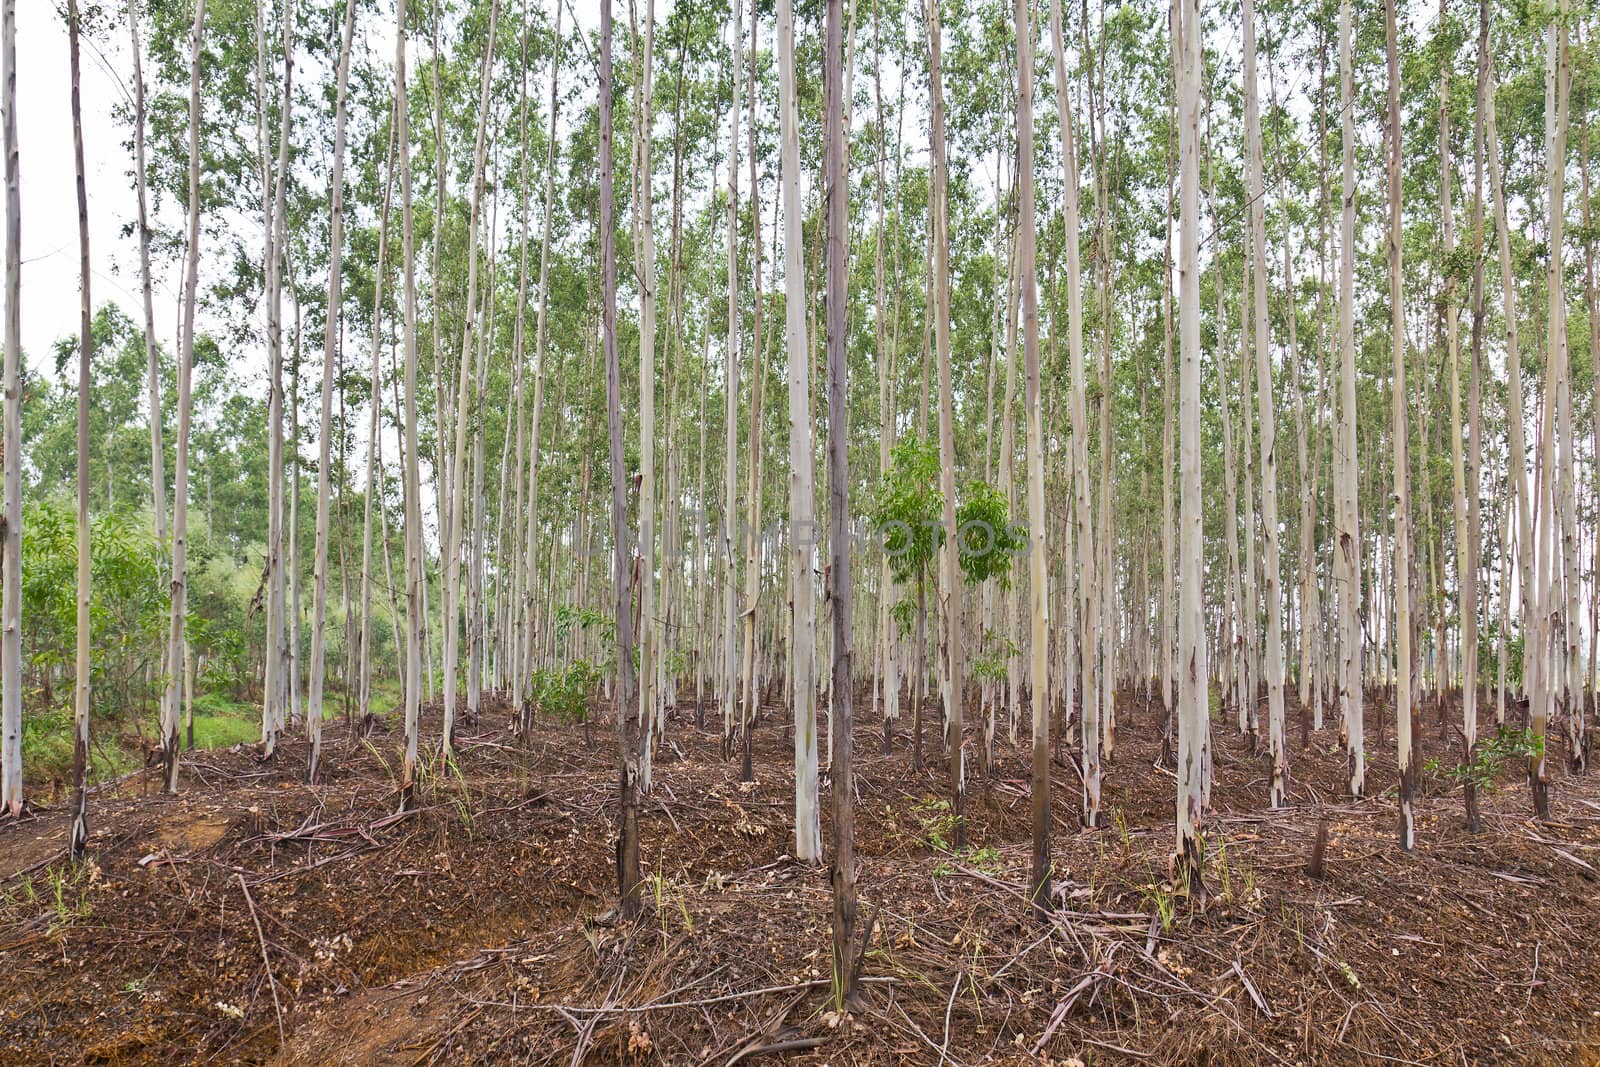 Plantation of Eucalyptus for paper industry